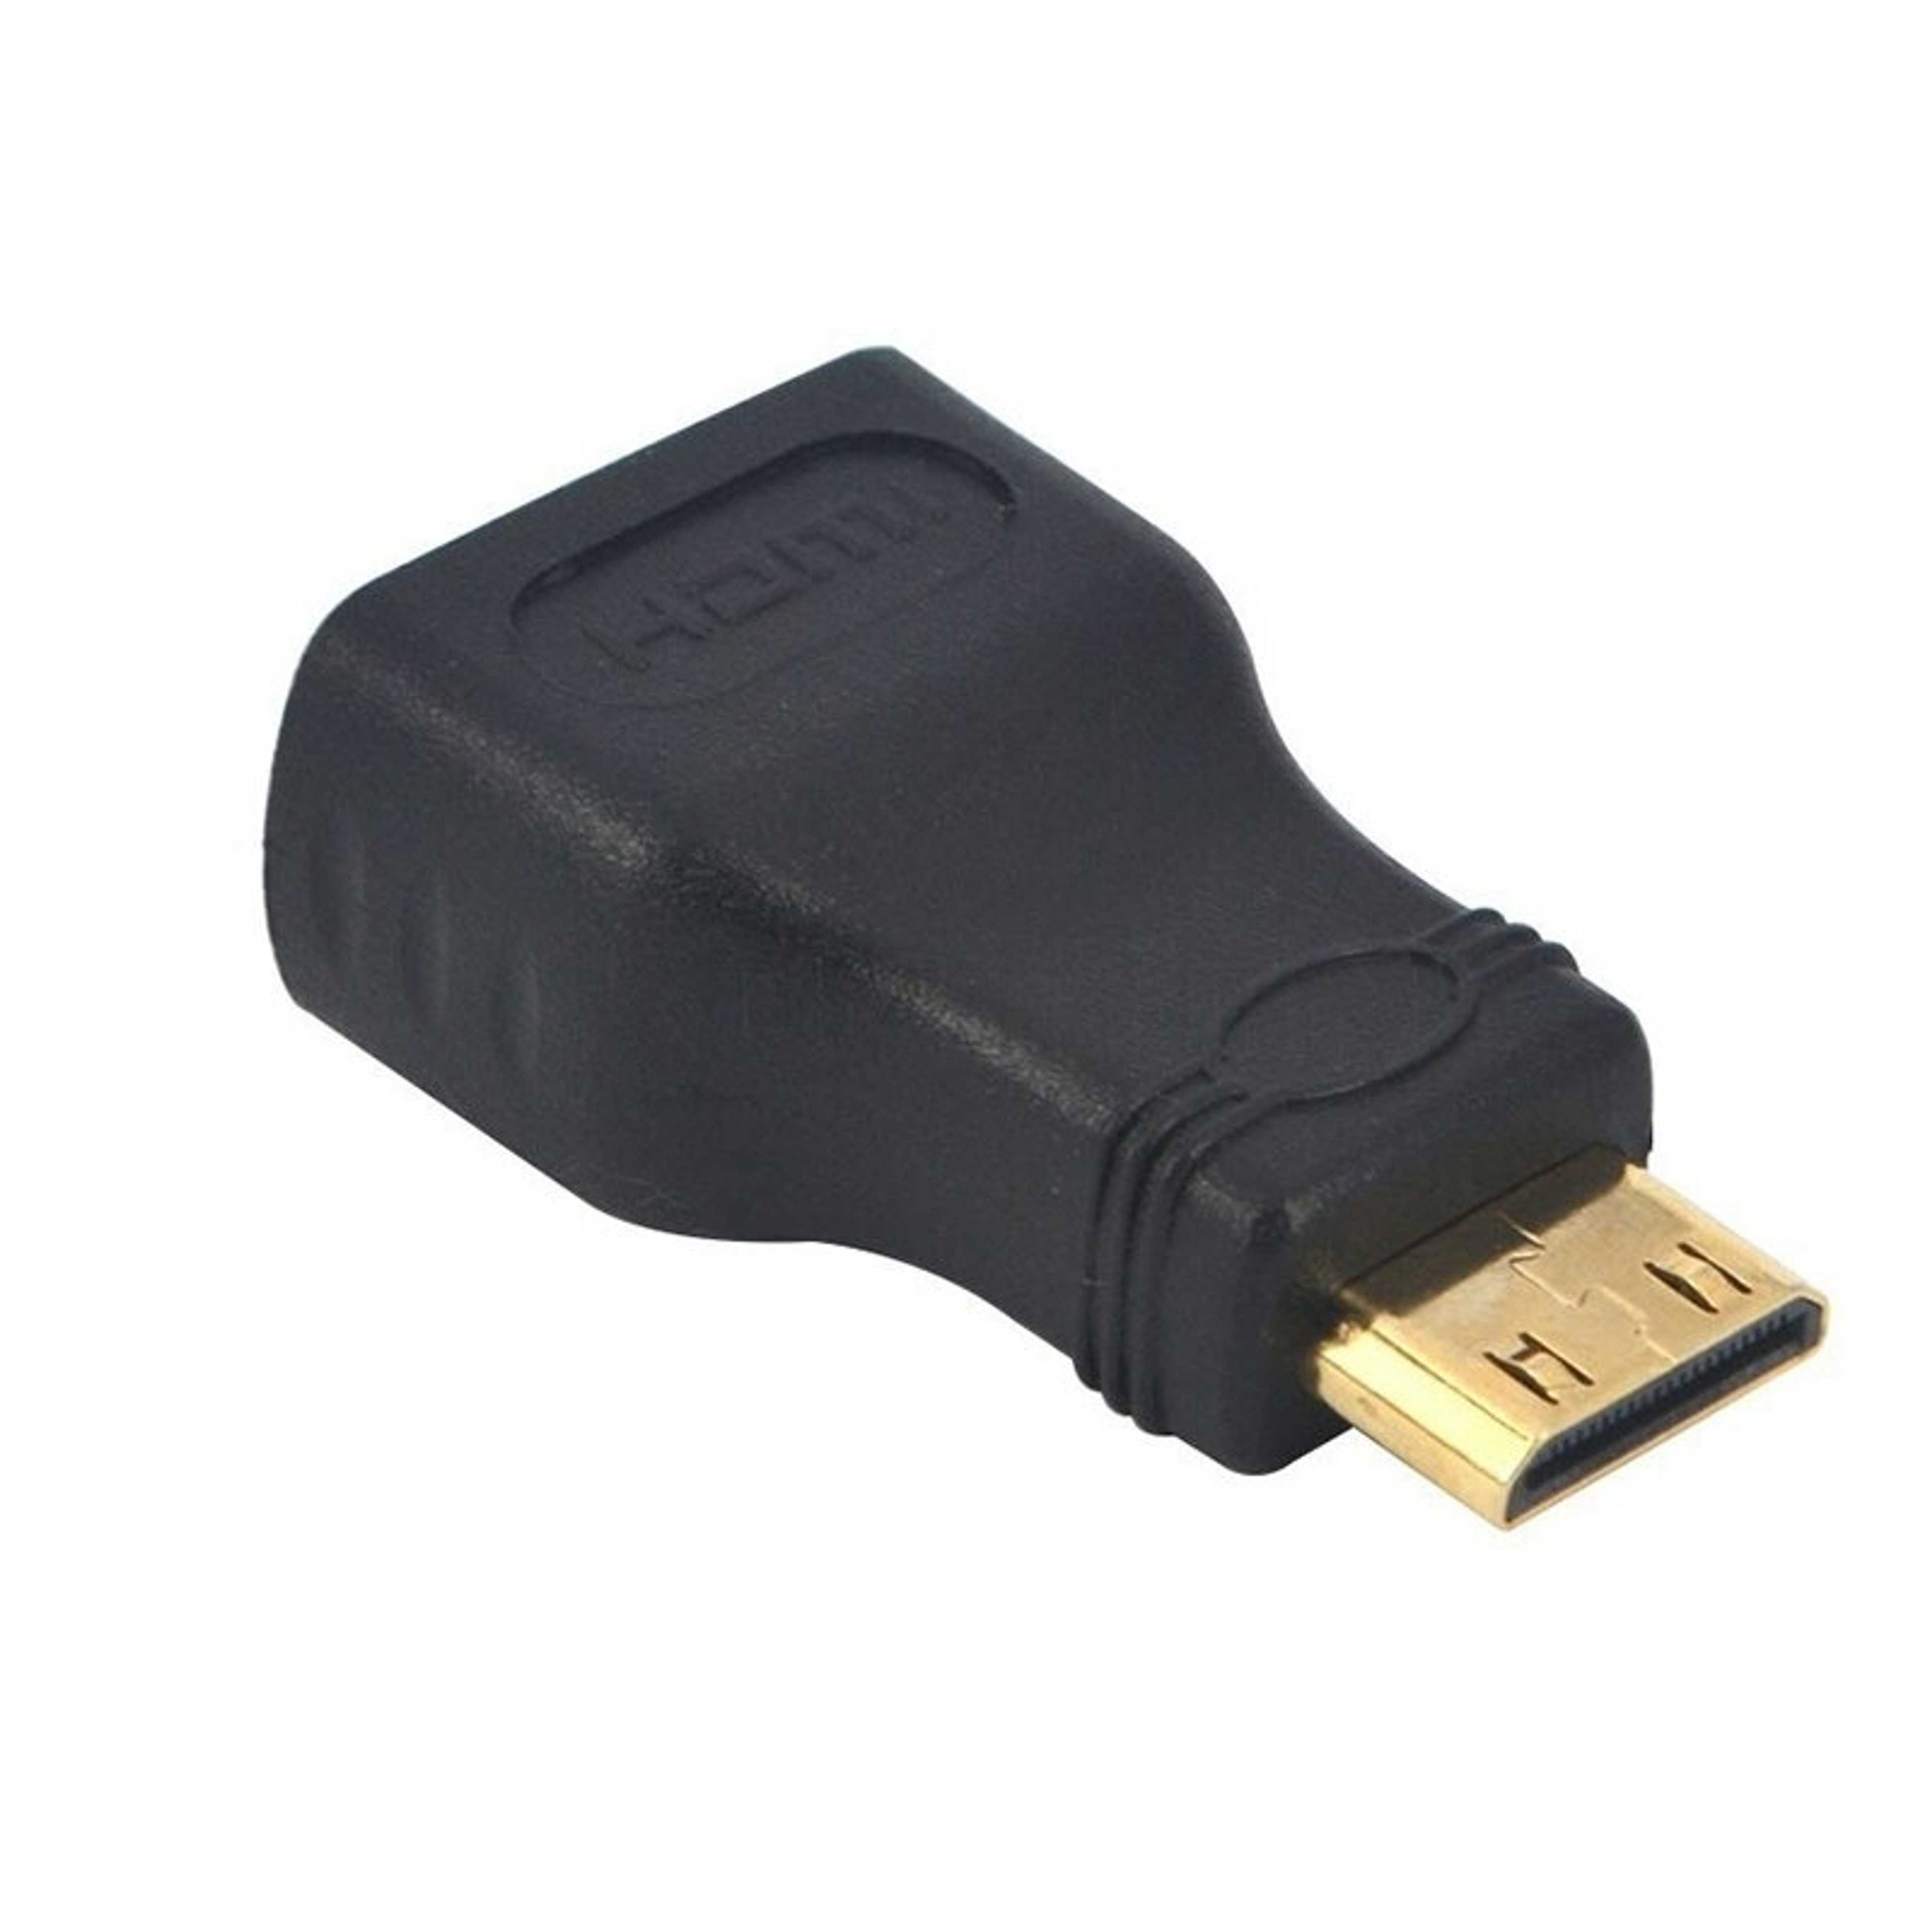 5pcs Mini HDMI To HDMI Adapter Gold Plated Male To Female HDMI 1.4 3D Extension Adapter 1080P Converter For HDTV Tablet Camera